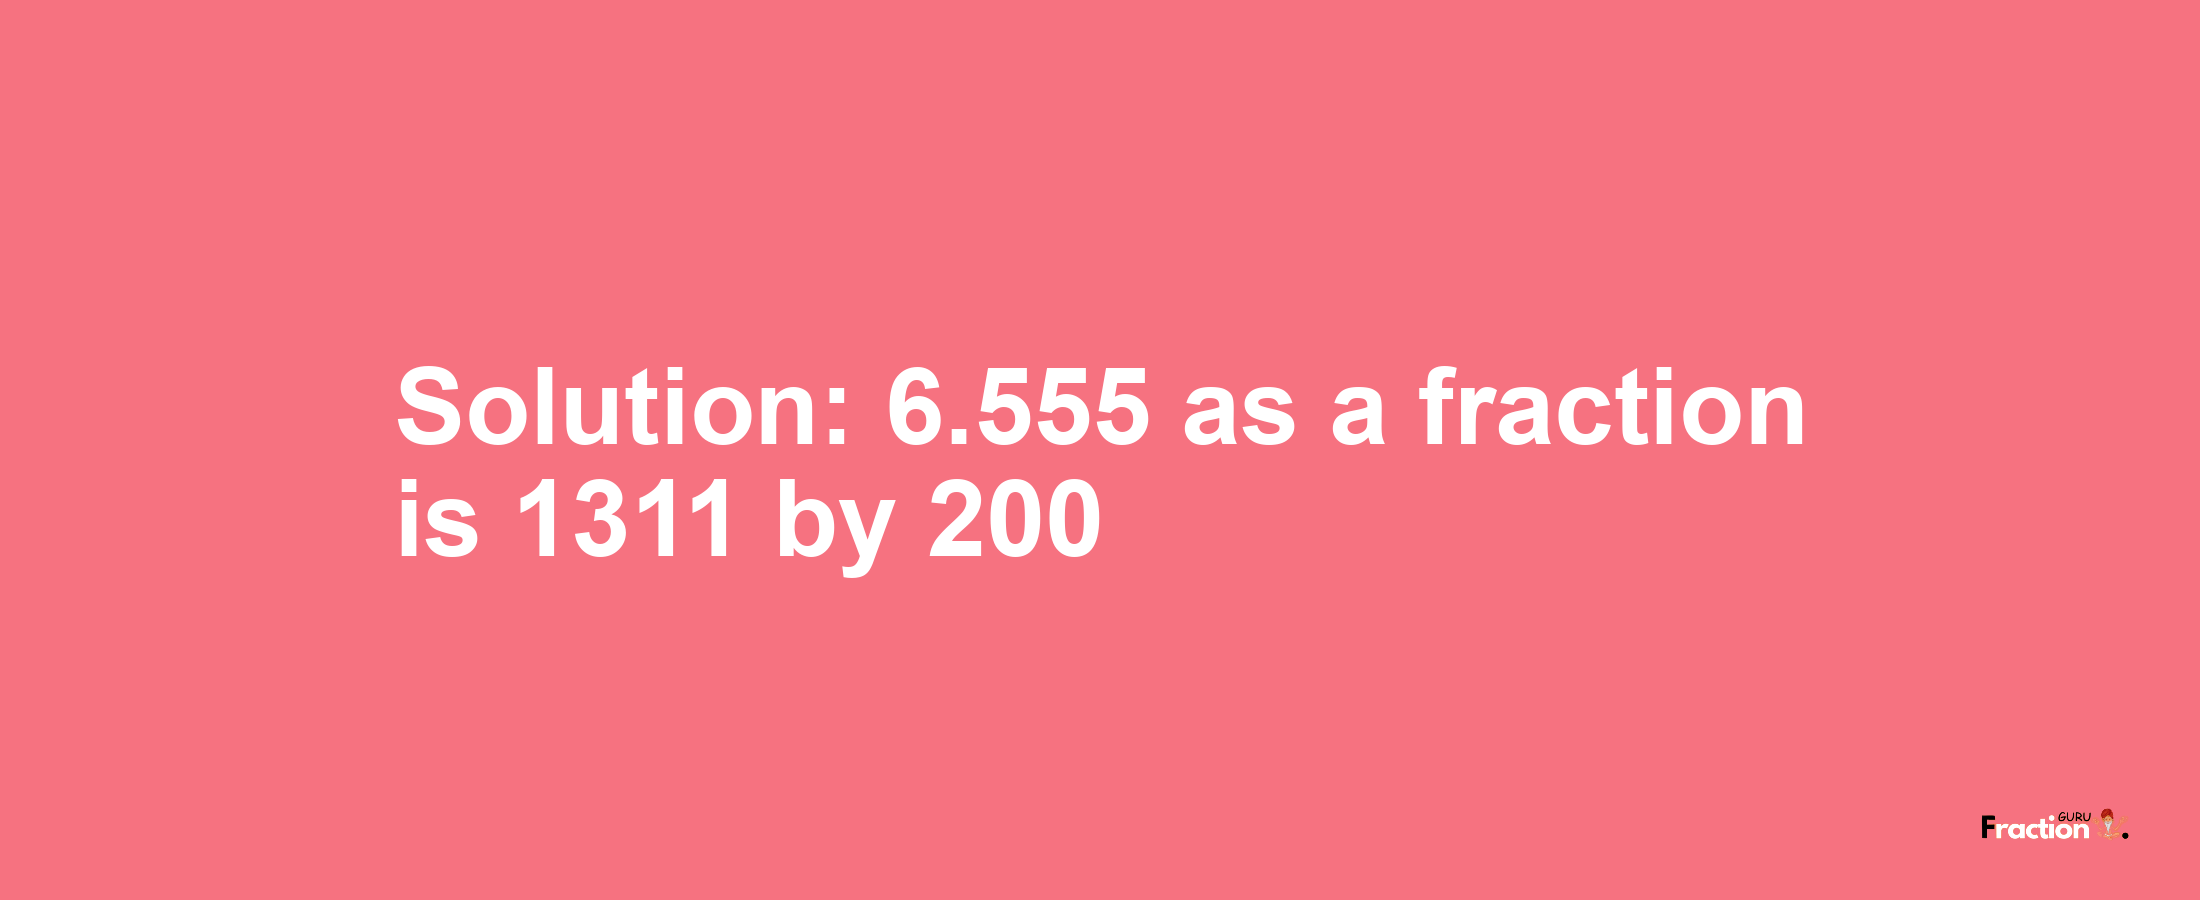 Solution:6.555 as a fraction is 1311/200